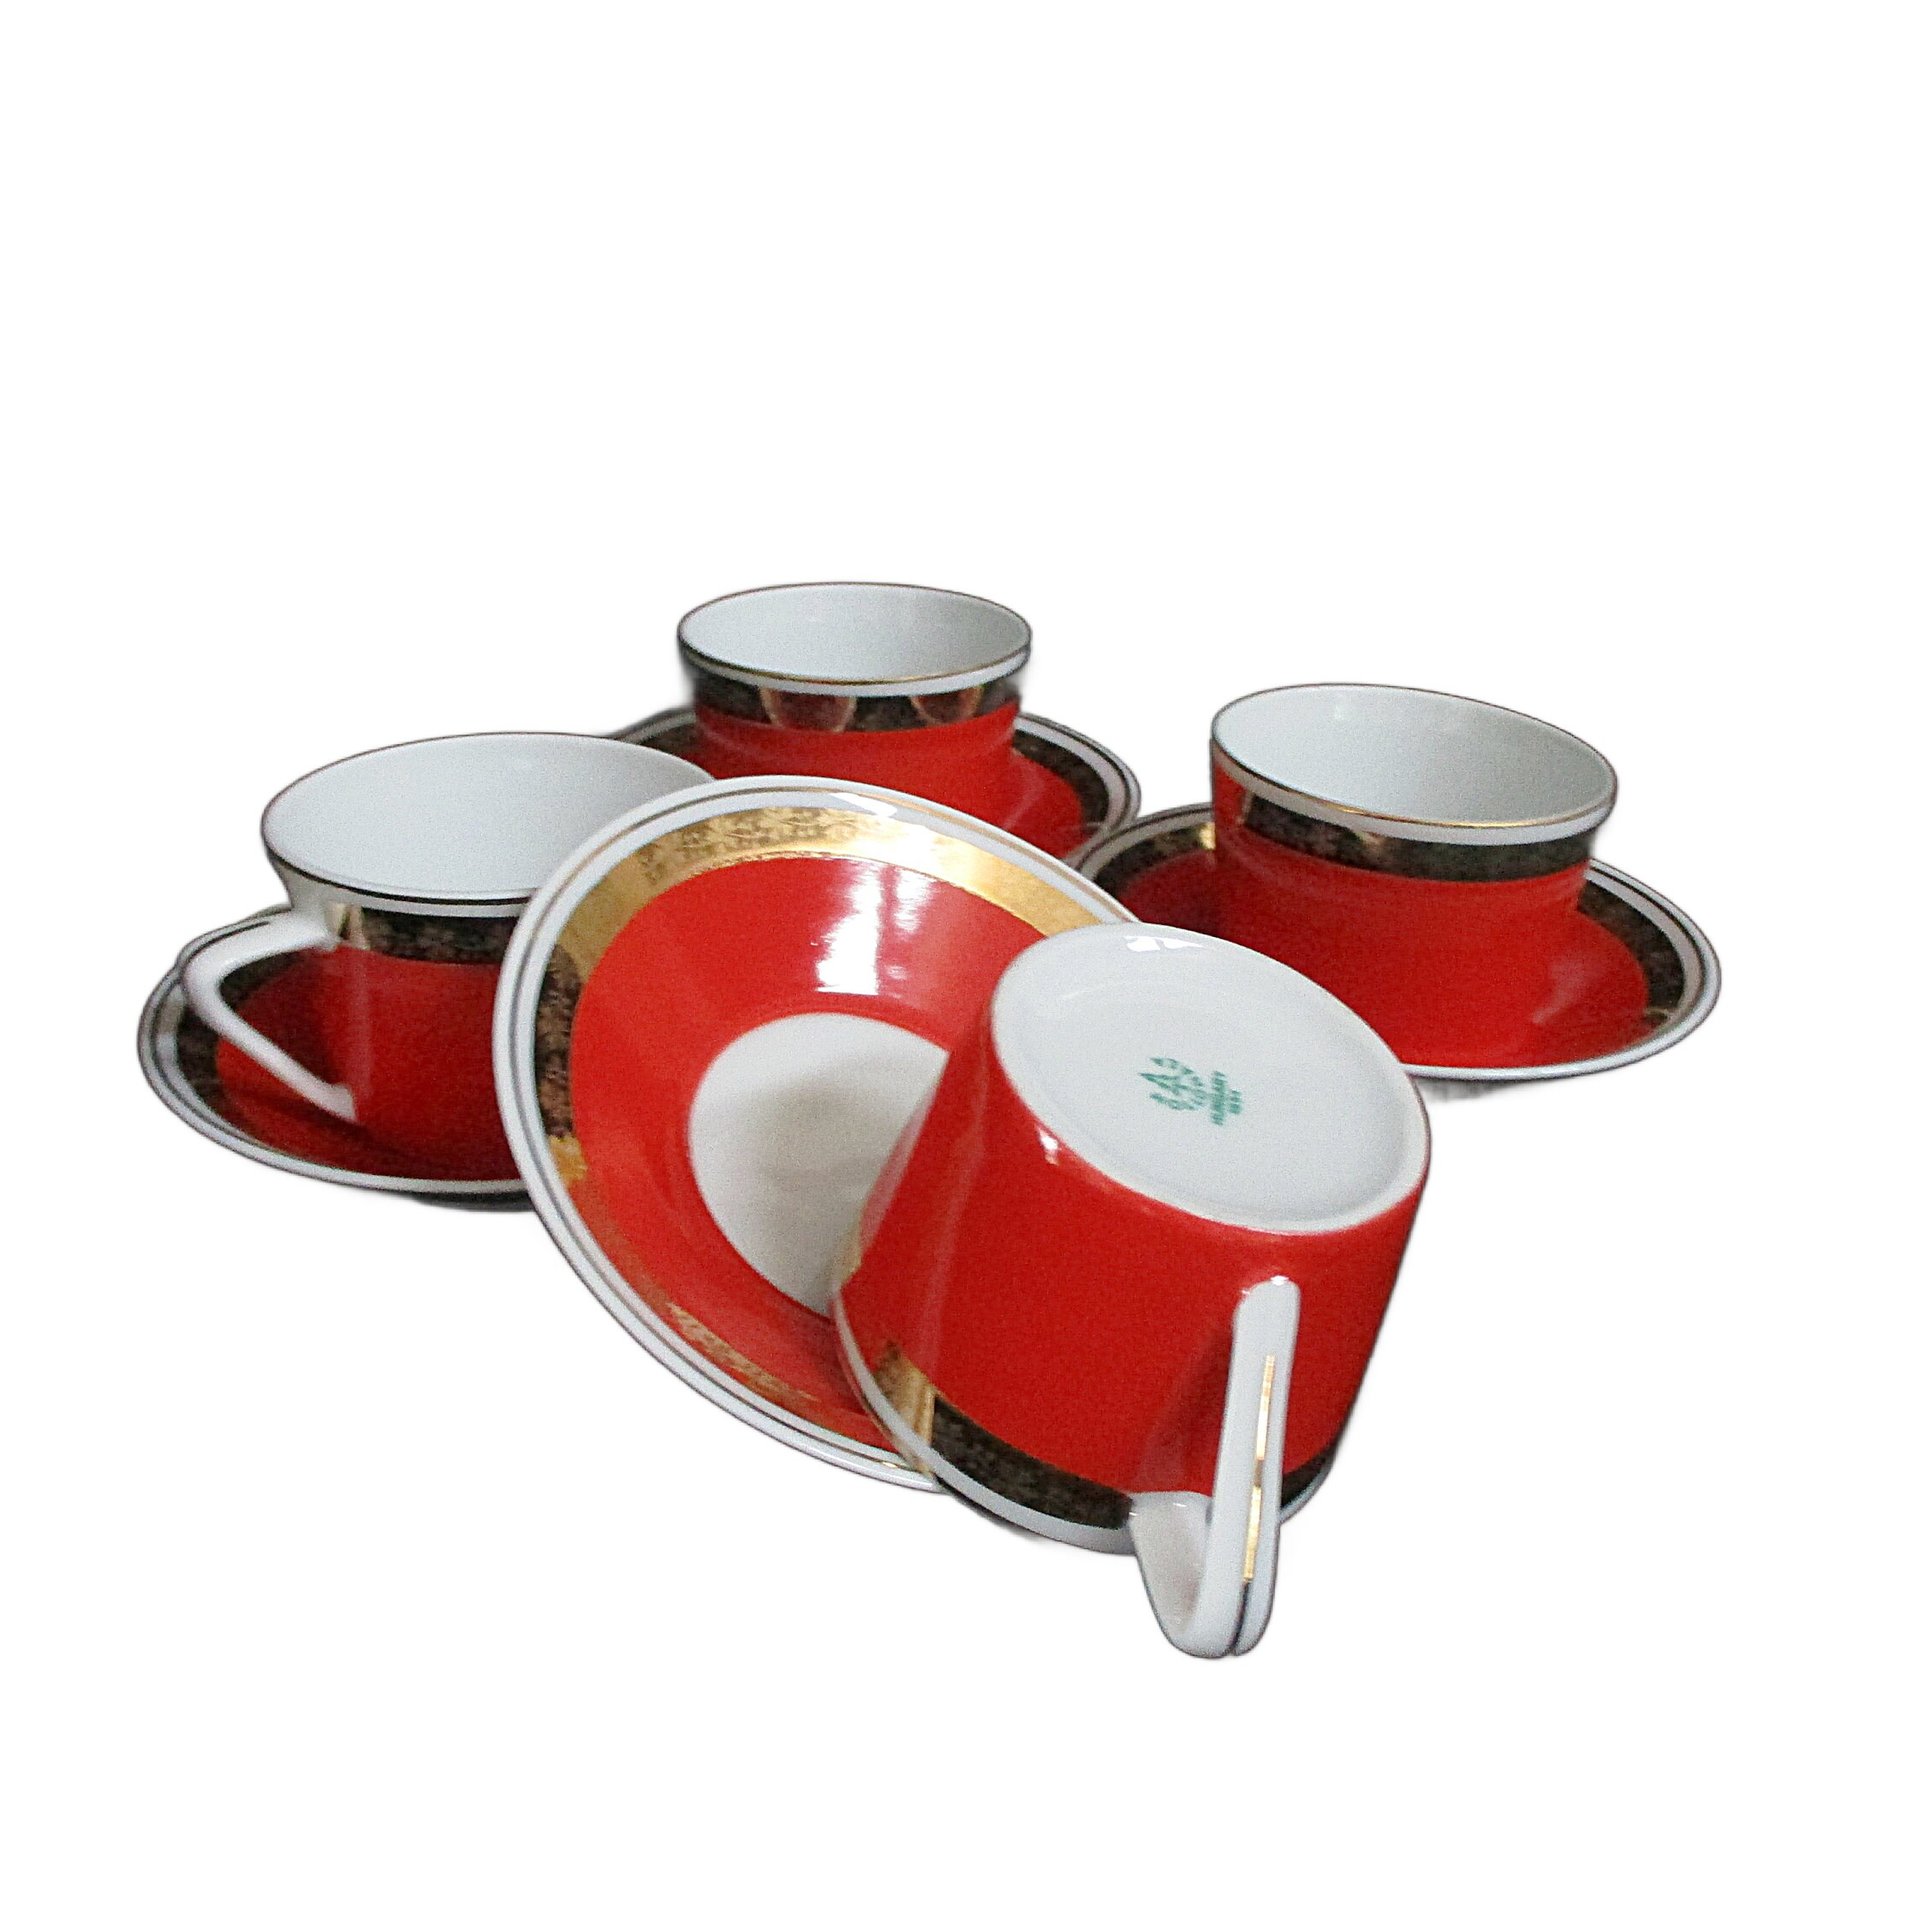 Espresso Cups and Saucers, Made in Hungary by Hollohaza, 8pcs, Red with Gold Trims, Hungarian Demitasse Set, Gift for Espresso Lover